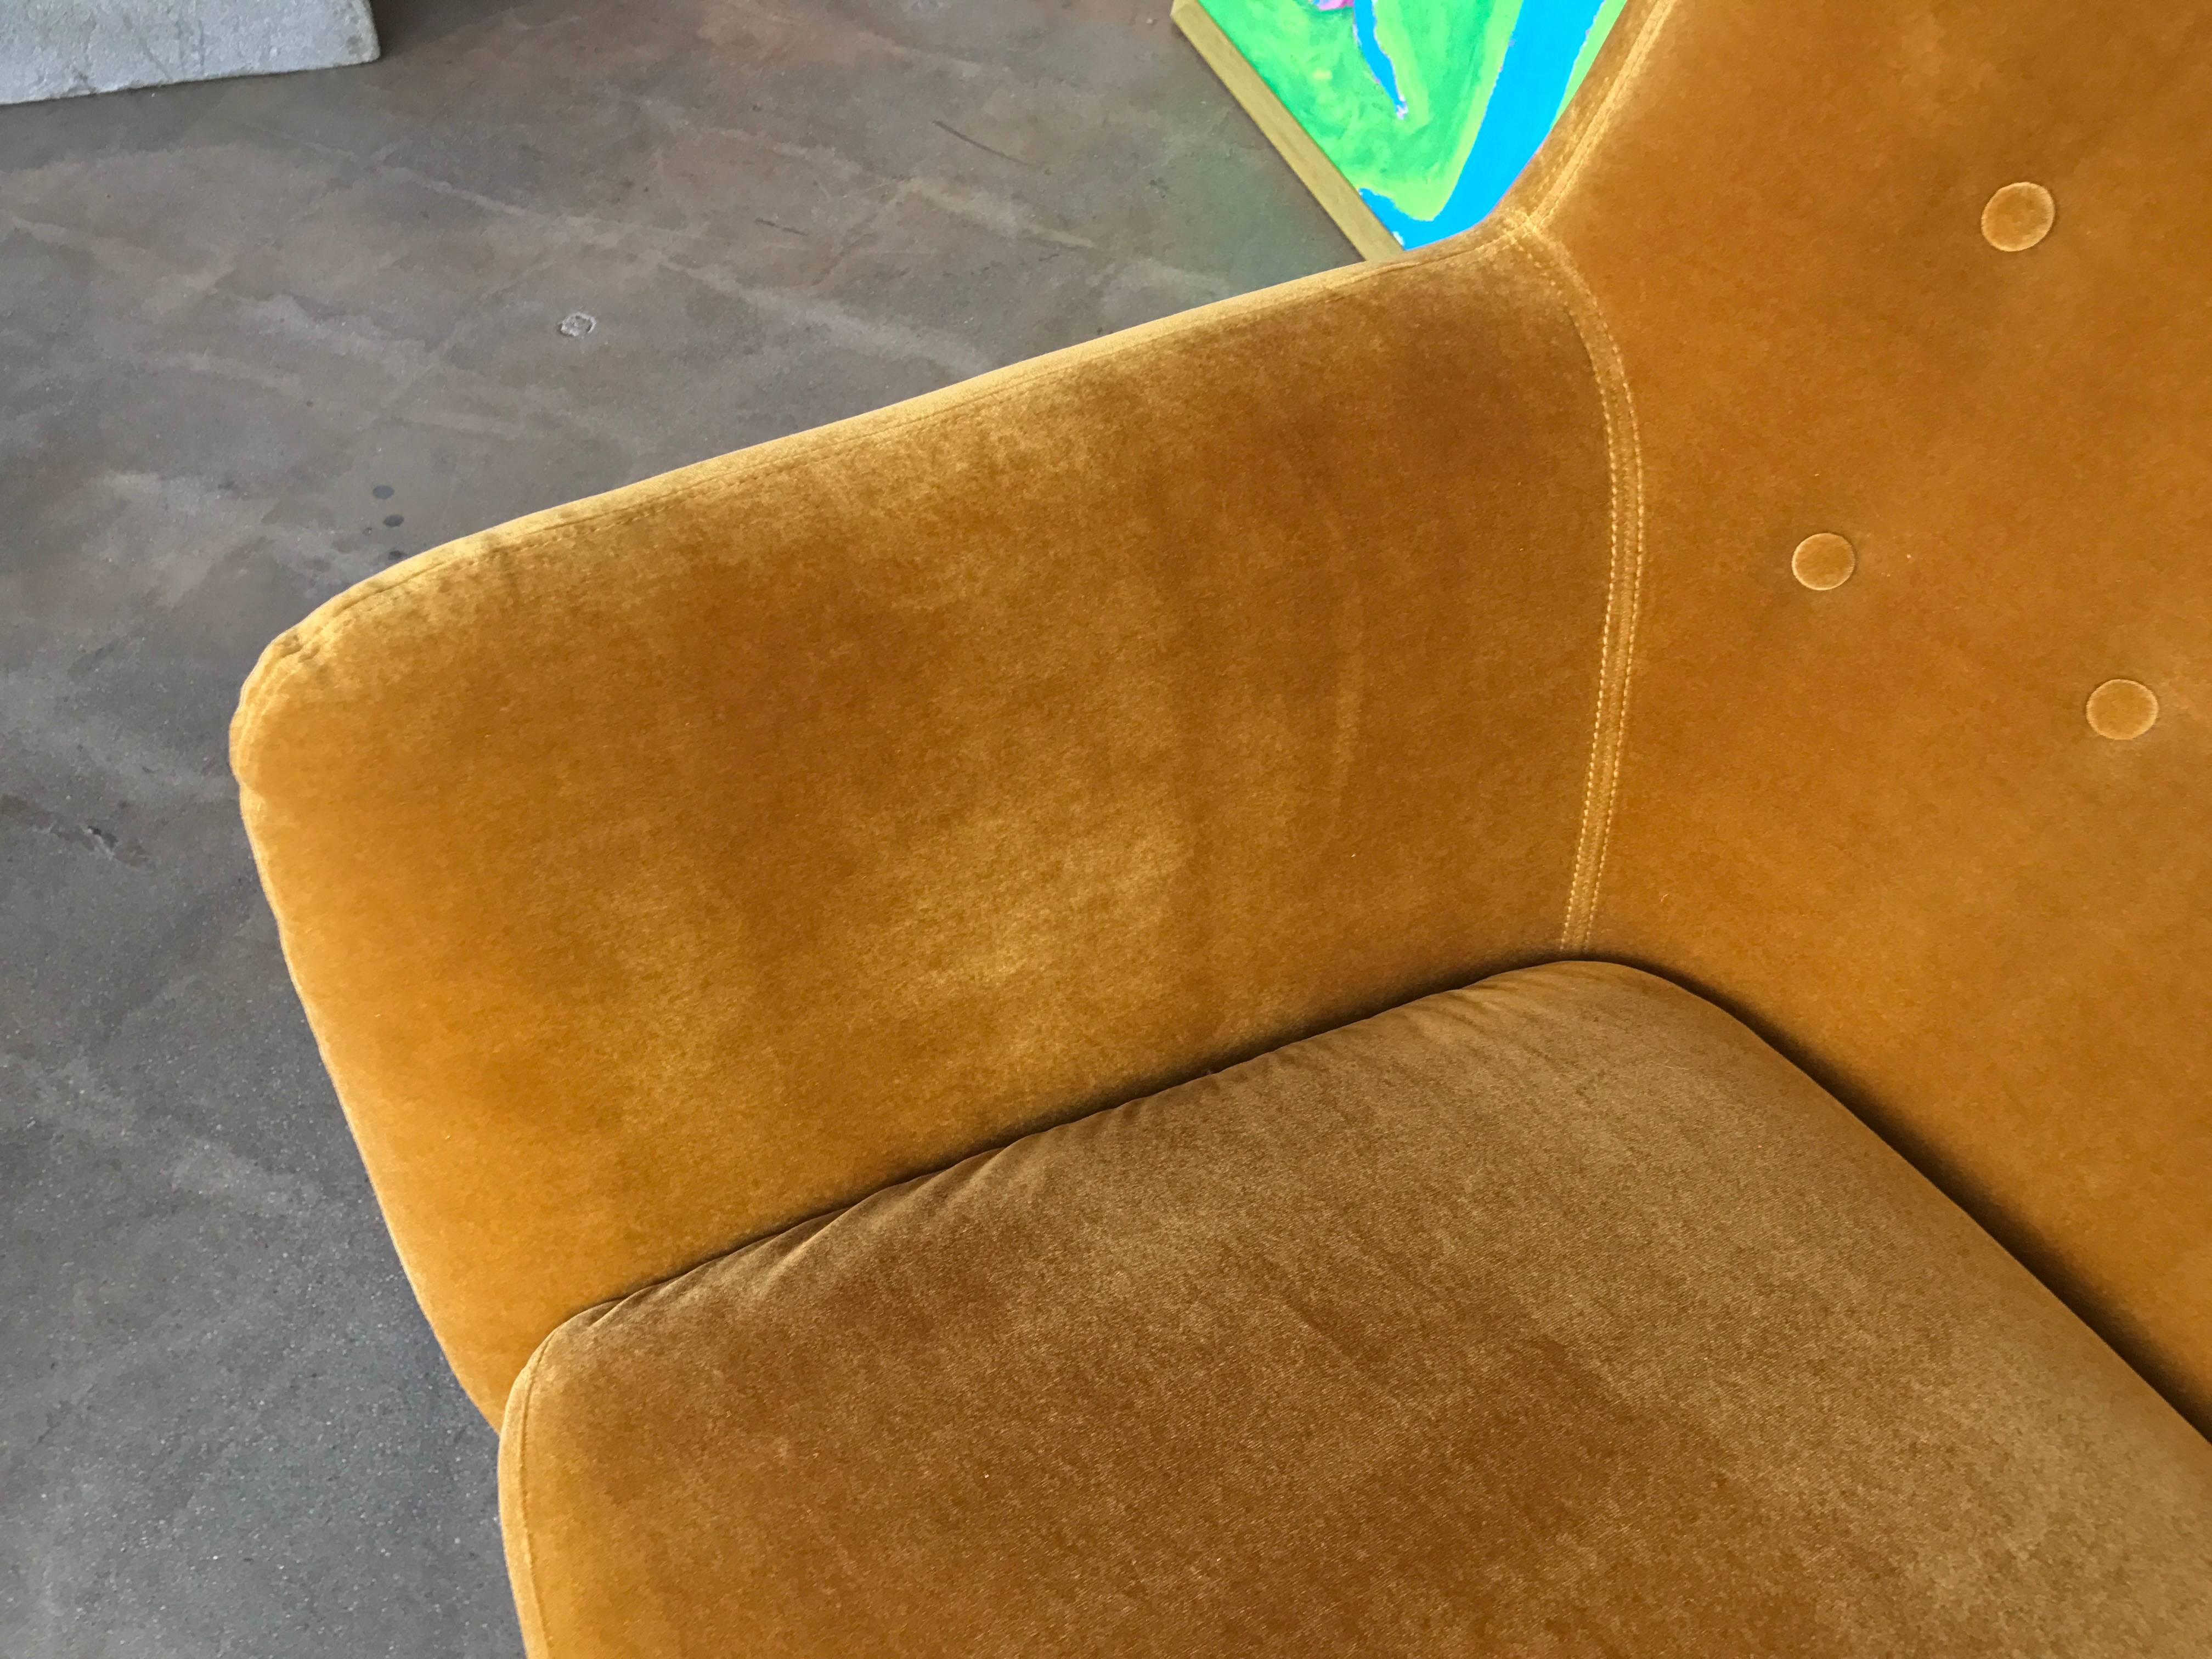 A sexy stylish curved sofa with a pretty color of yellow wool velvet upholstery. Cushions are attached to the sofa. The legs are oak. A extremely comfortable sofa. There are minor marks to the upholstery and legs. We have seen curved sofas like this